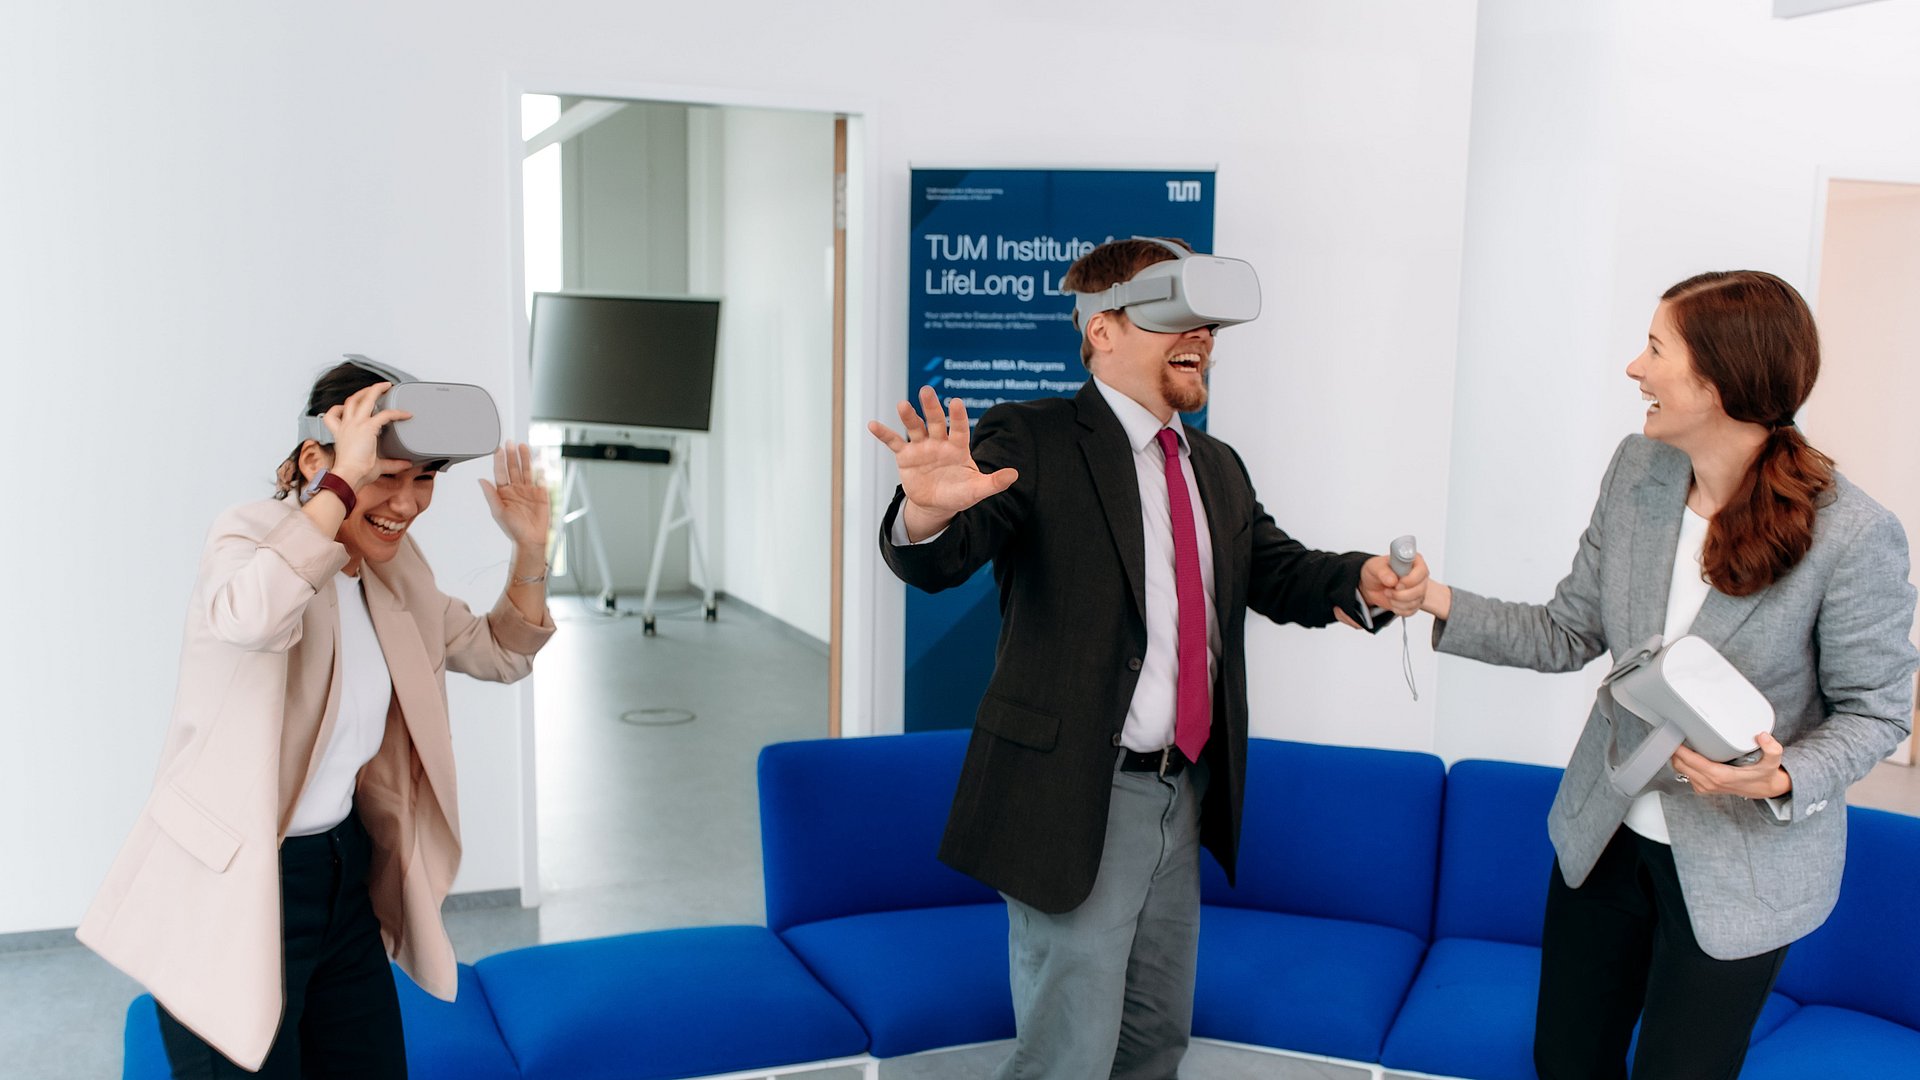 Employees of the TUM Institute for LifeLong Learning test out VR headsets.